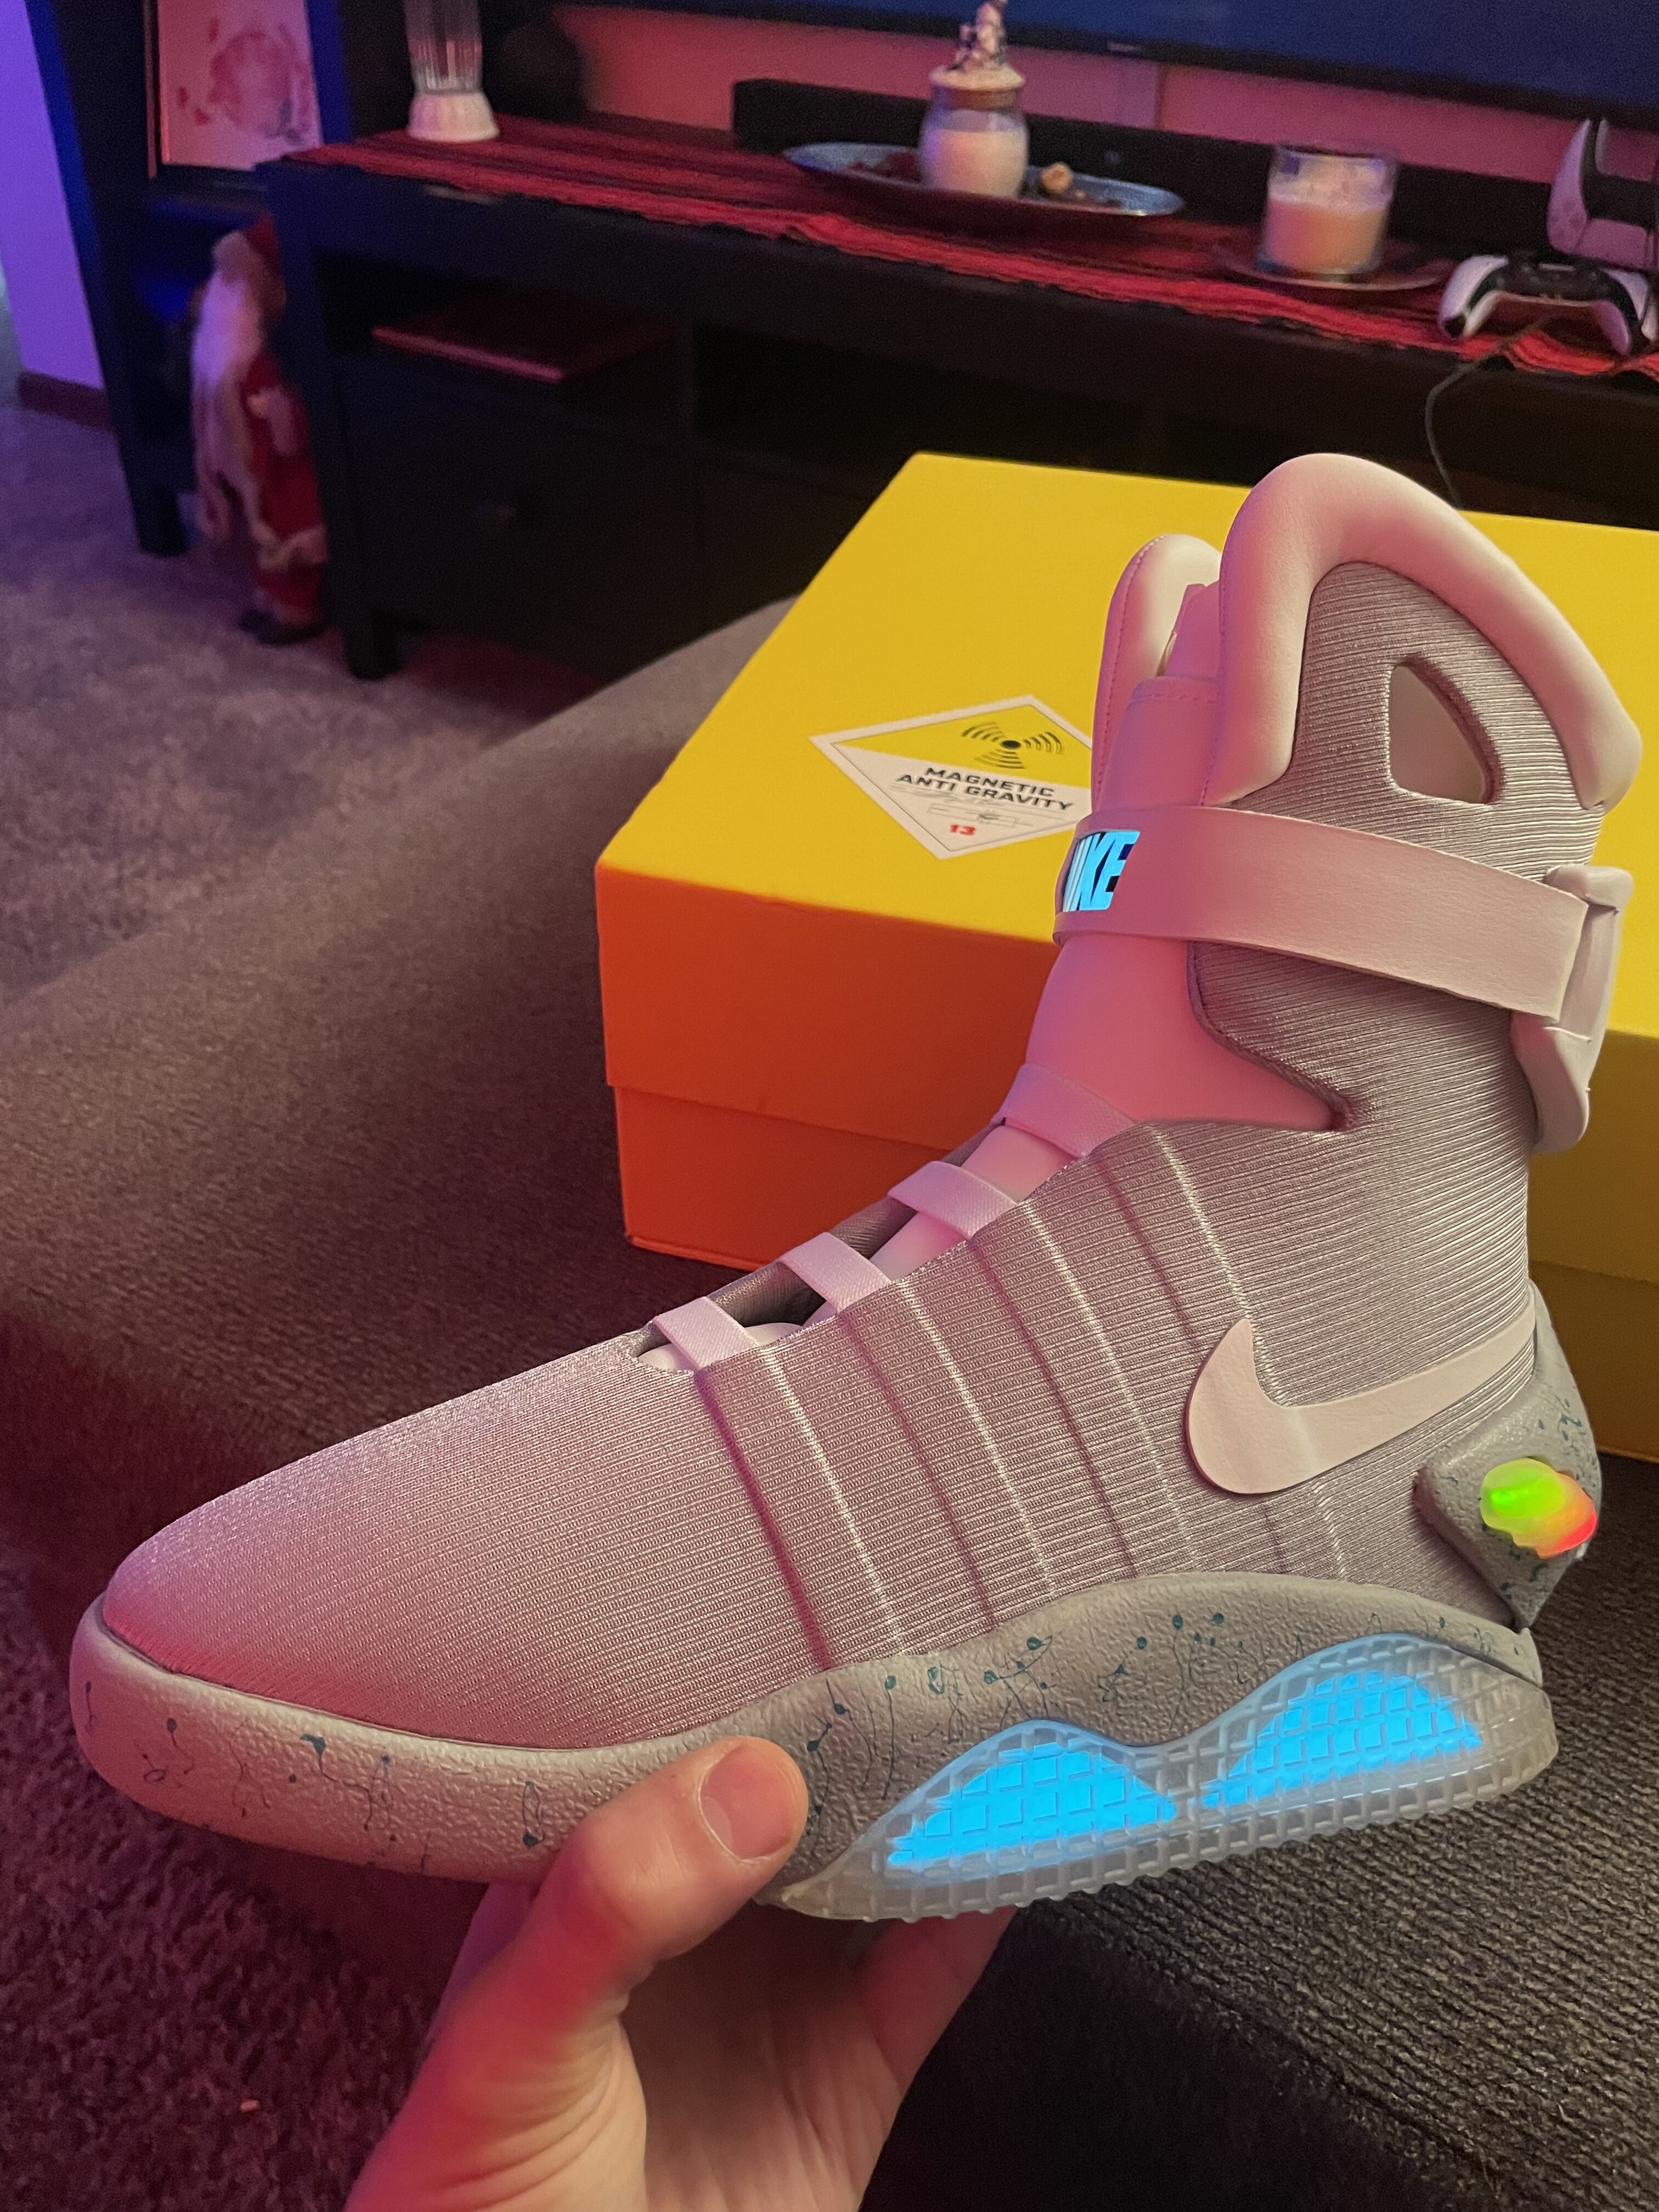 Official V3 Nike MAG Replica Thread - V3 Discussion Thread | Page 198 | RPF  Costume and Prop Maker Community